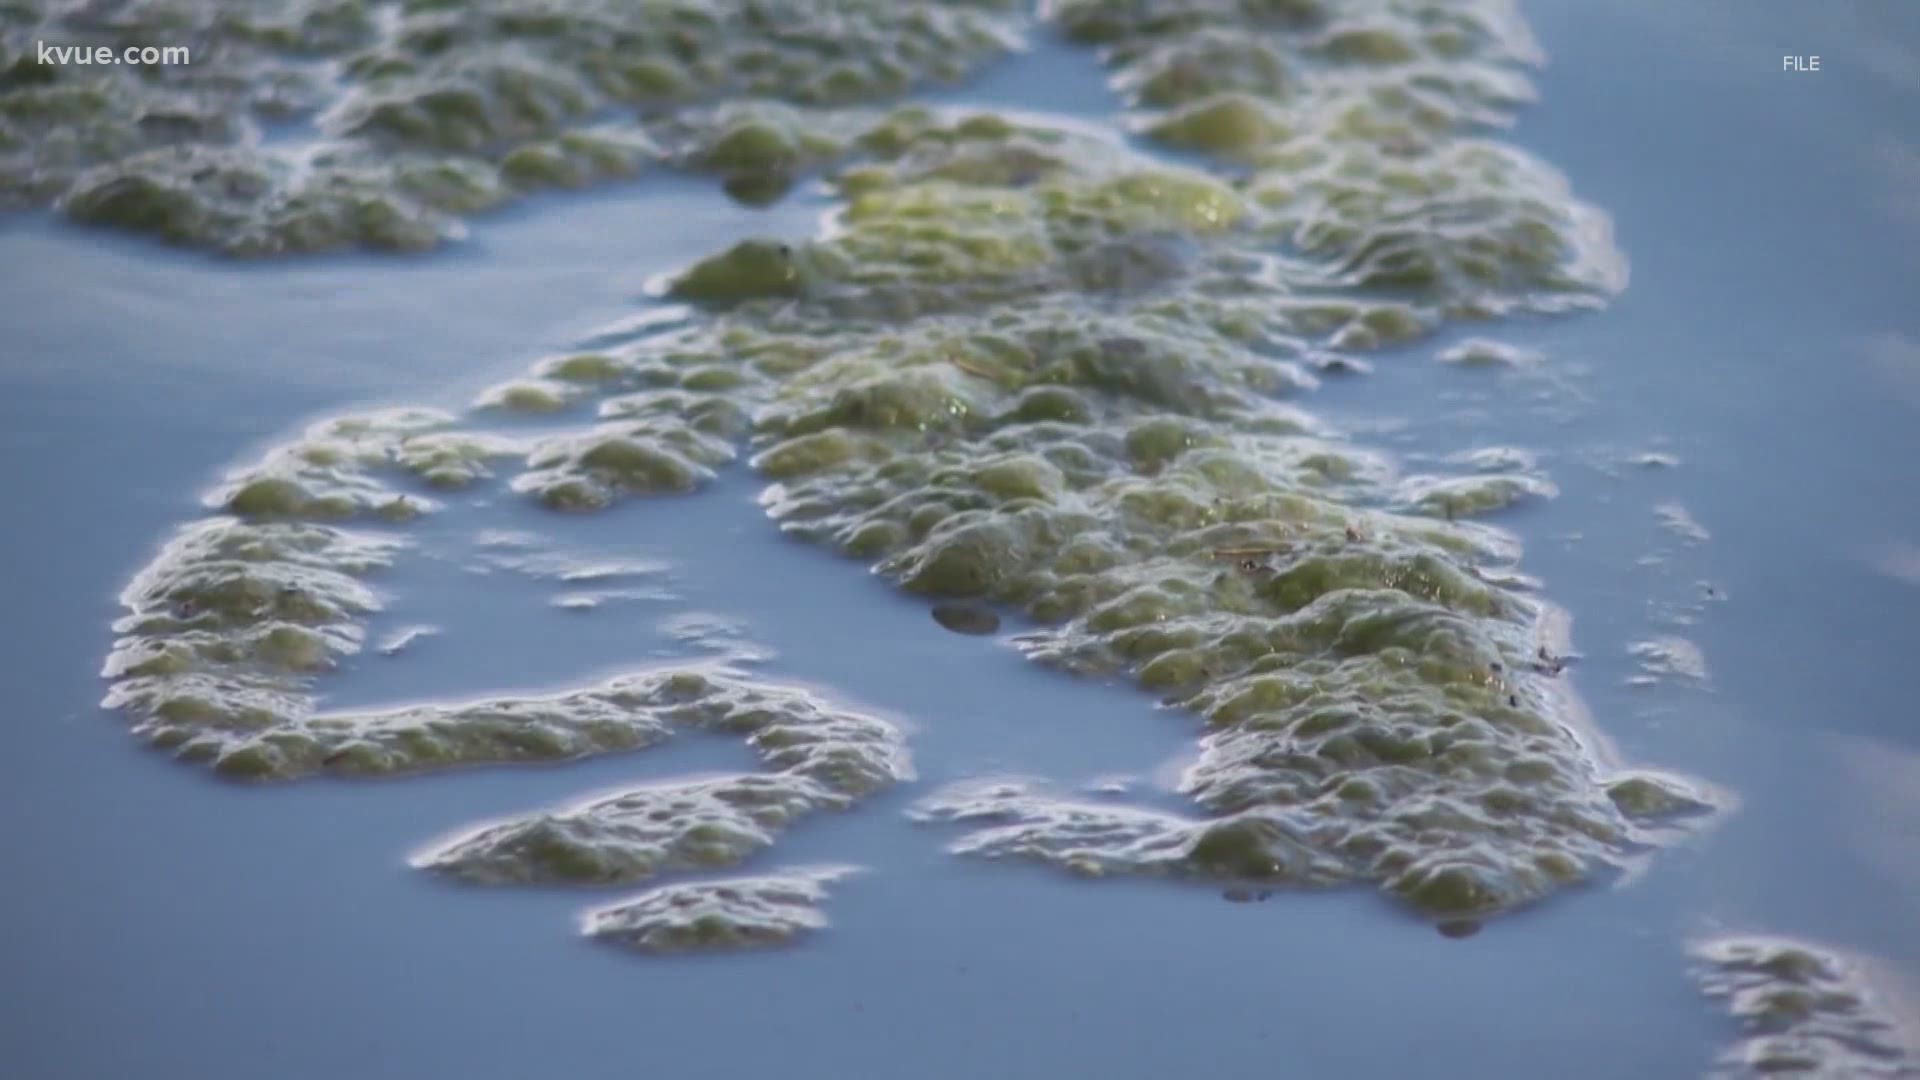 The City of Austin said toxic blue-green algae has been detected in Lake Austin near Mansfield Dam. Trace amounts have also been detected in Lady Bird Lake.